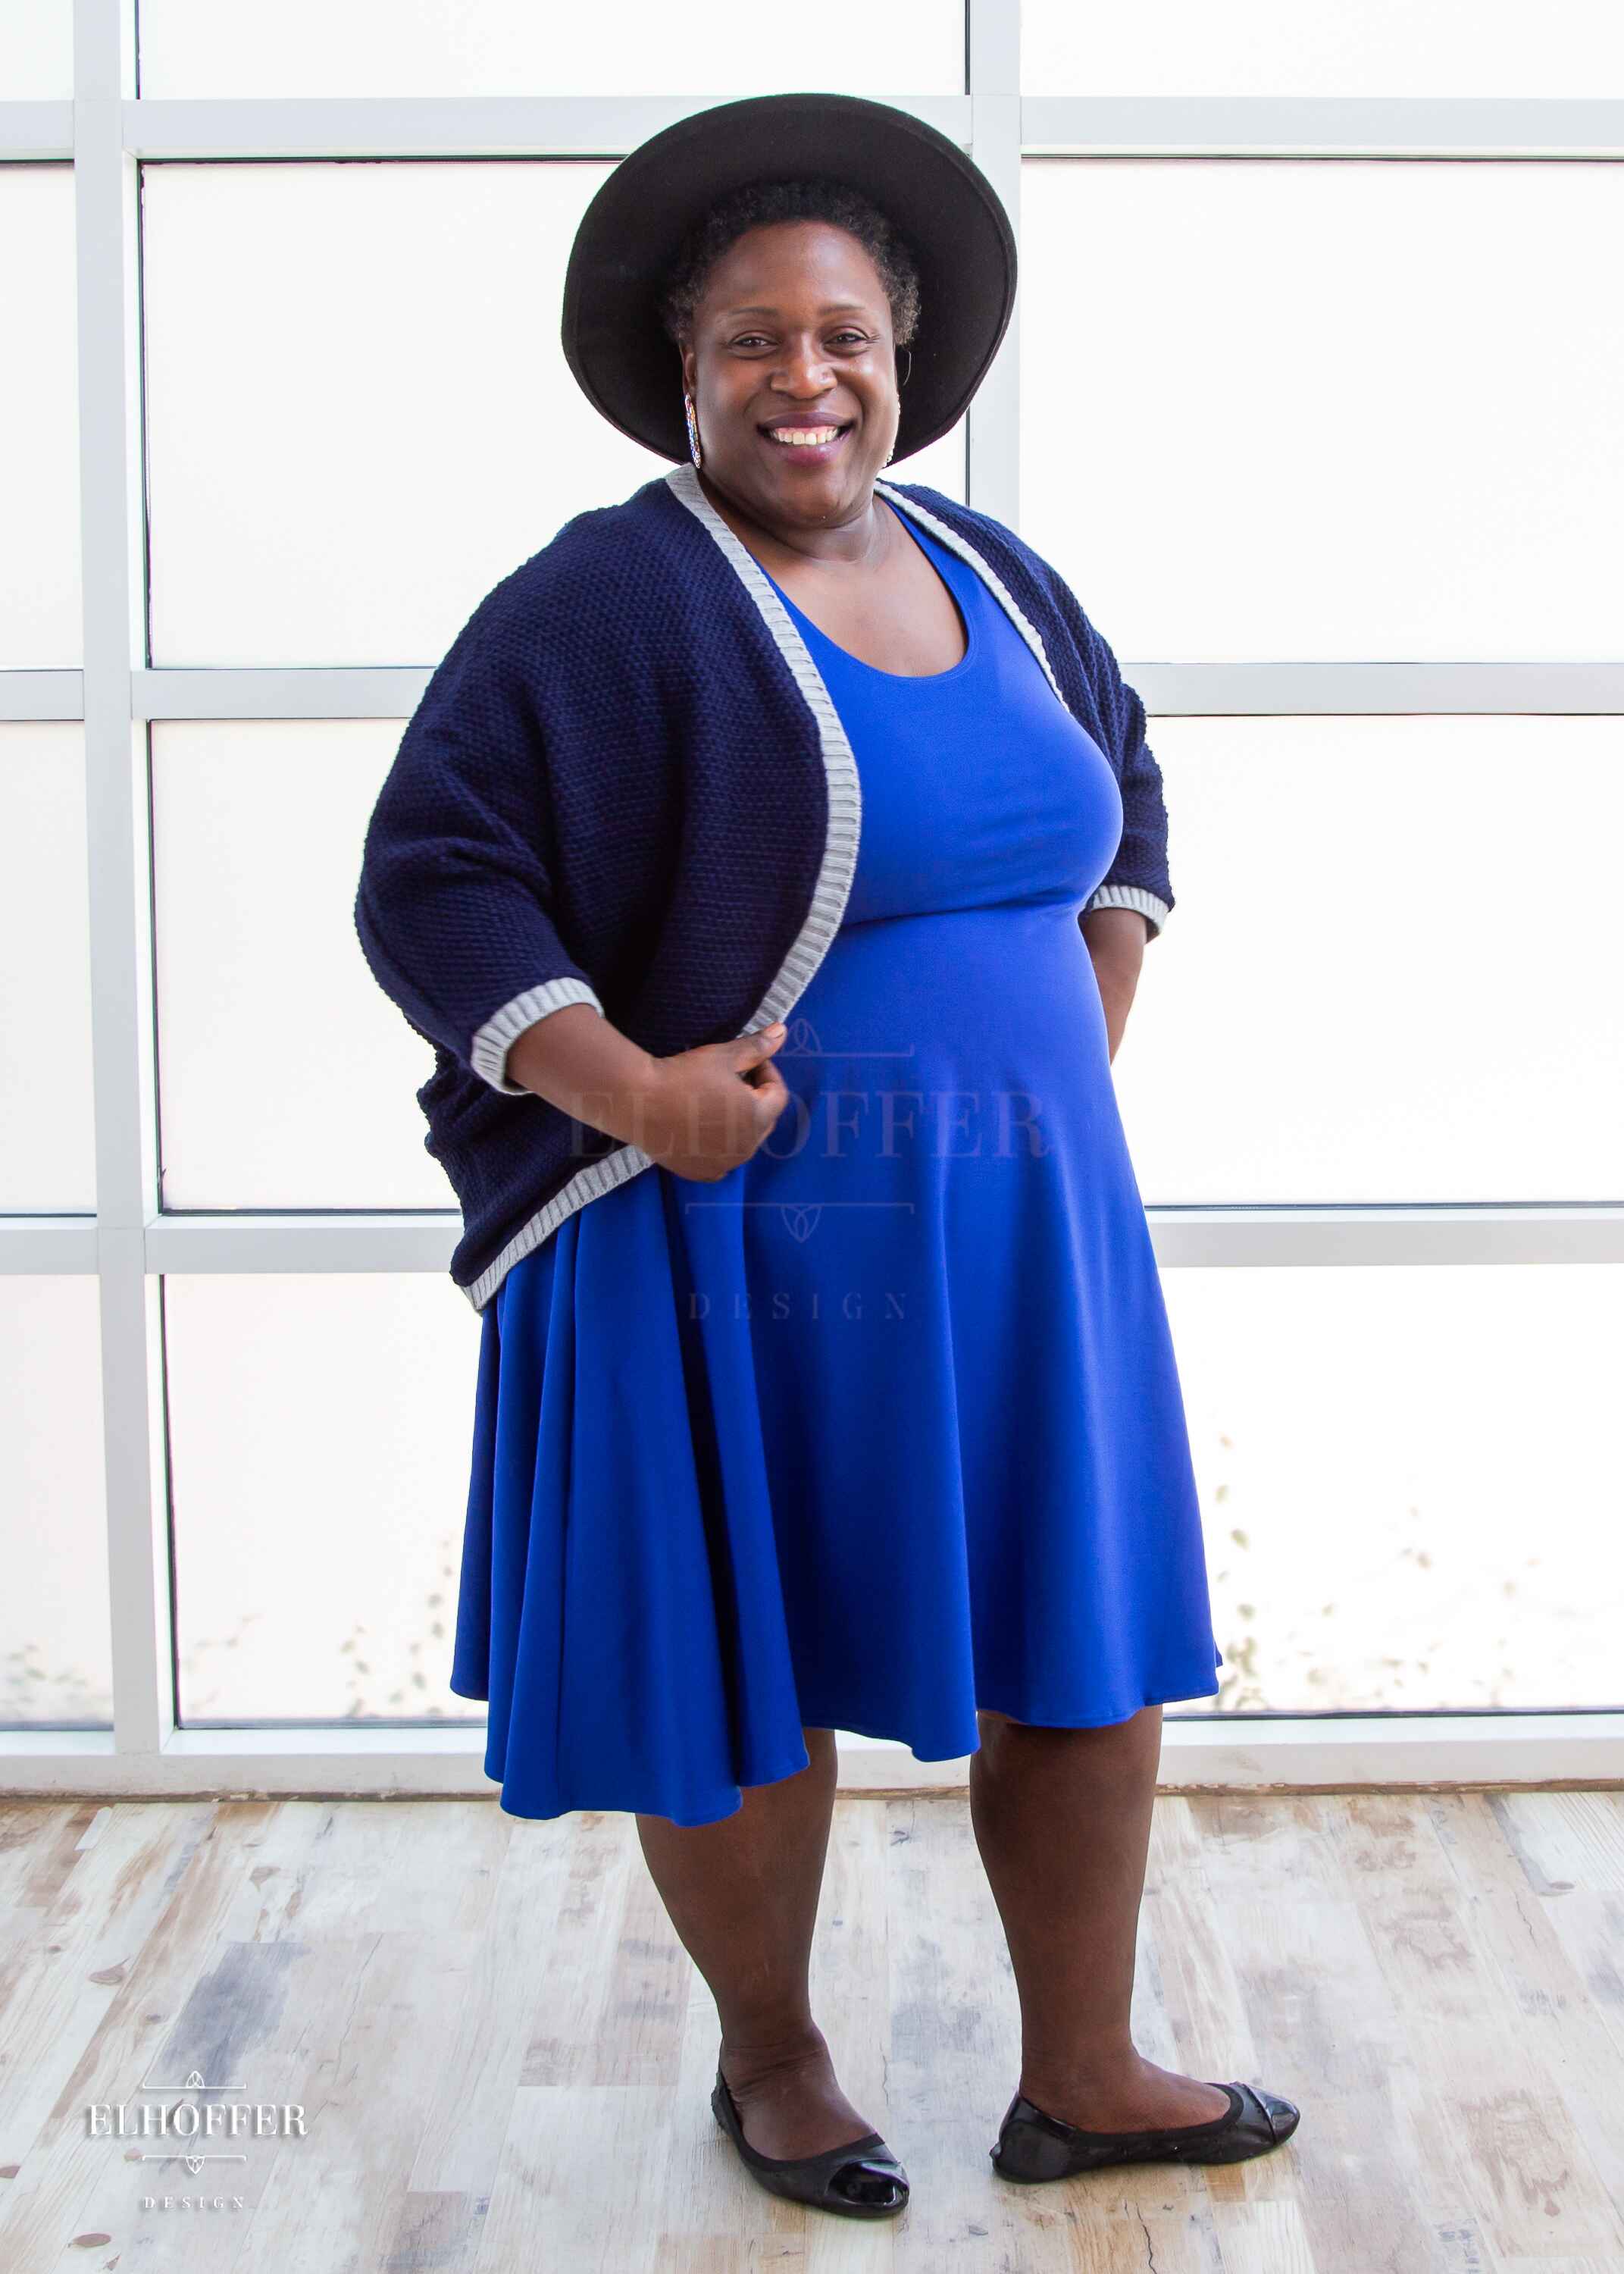 Adalgize, a medium dark skinned 4xl model with short super curly black hair, is smiling while wearing a dark blue loose knit dolman with light grey ribbing around edges and cuffs.  The dolman features 3/4 length sleeves and a magical script design (circle with a T crossing through the circle) on the back.  She paired the dolman with a cobalt blue knee length dress.